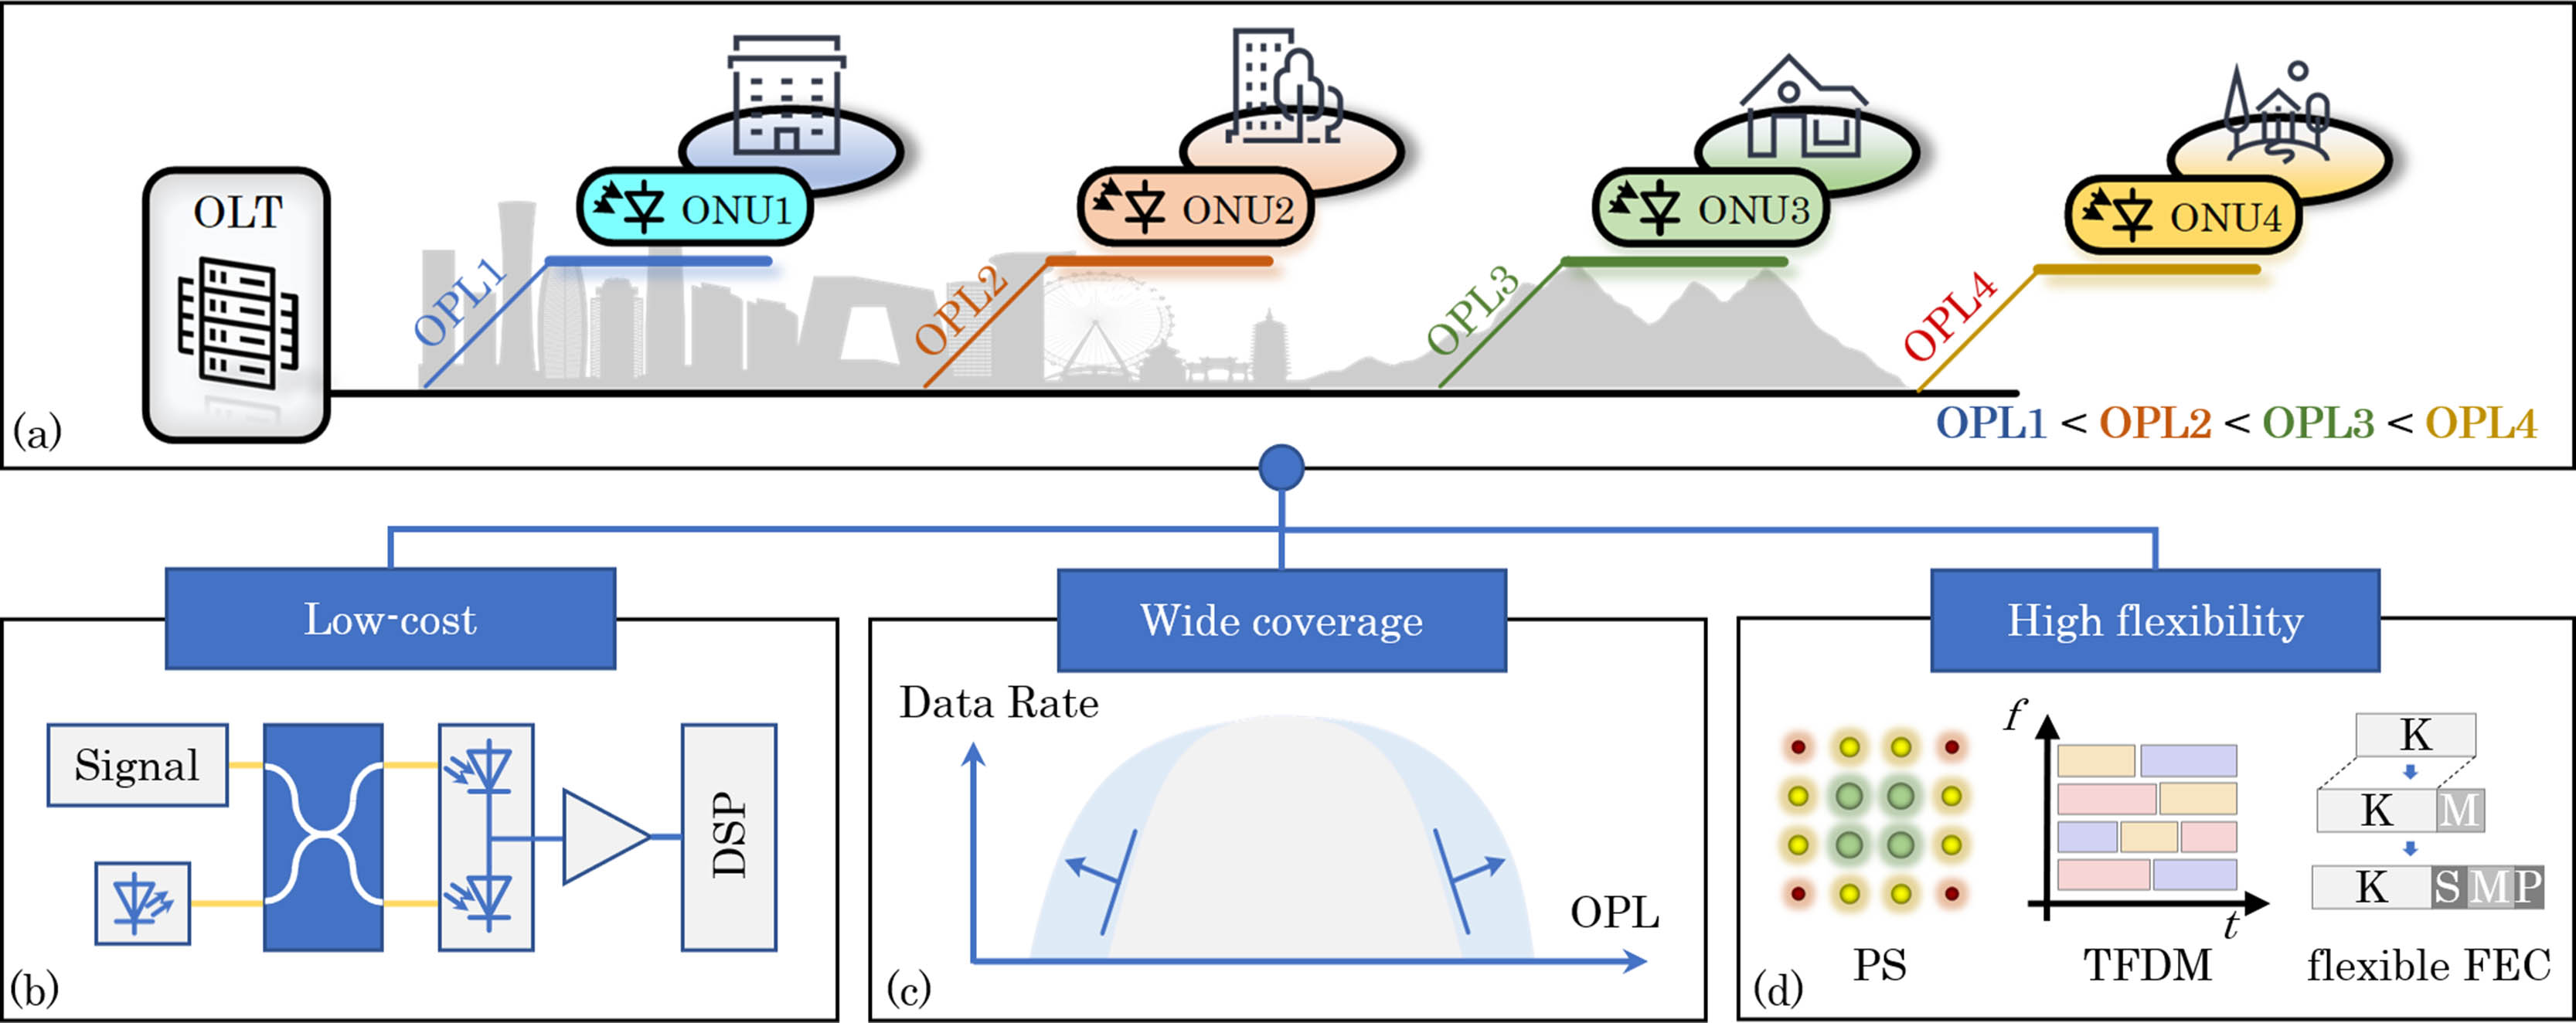 (a) Point-to-multipoint schematic of the CPON system; (b)–(d) present the three key advancements in next-generation CPON, low cost, wide coverage, and high flexibility.